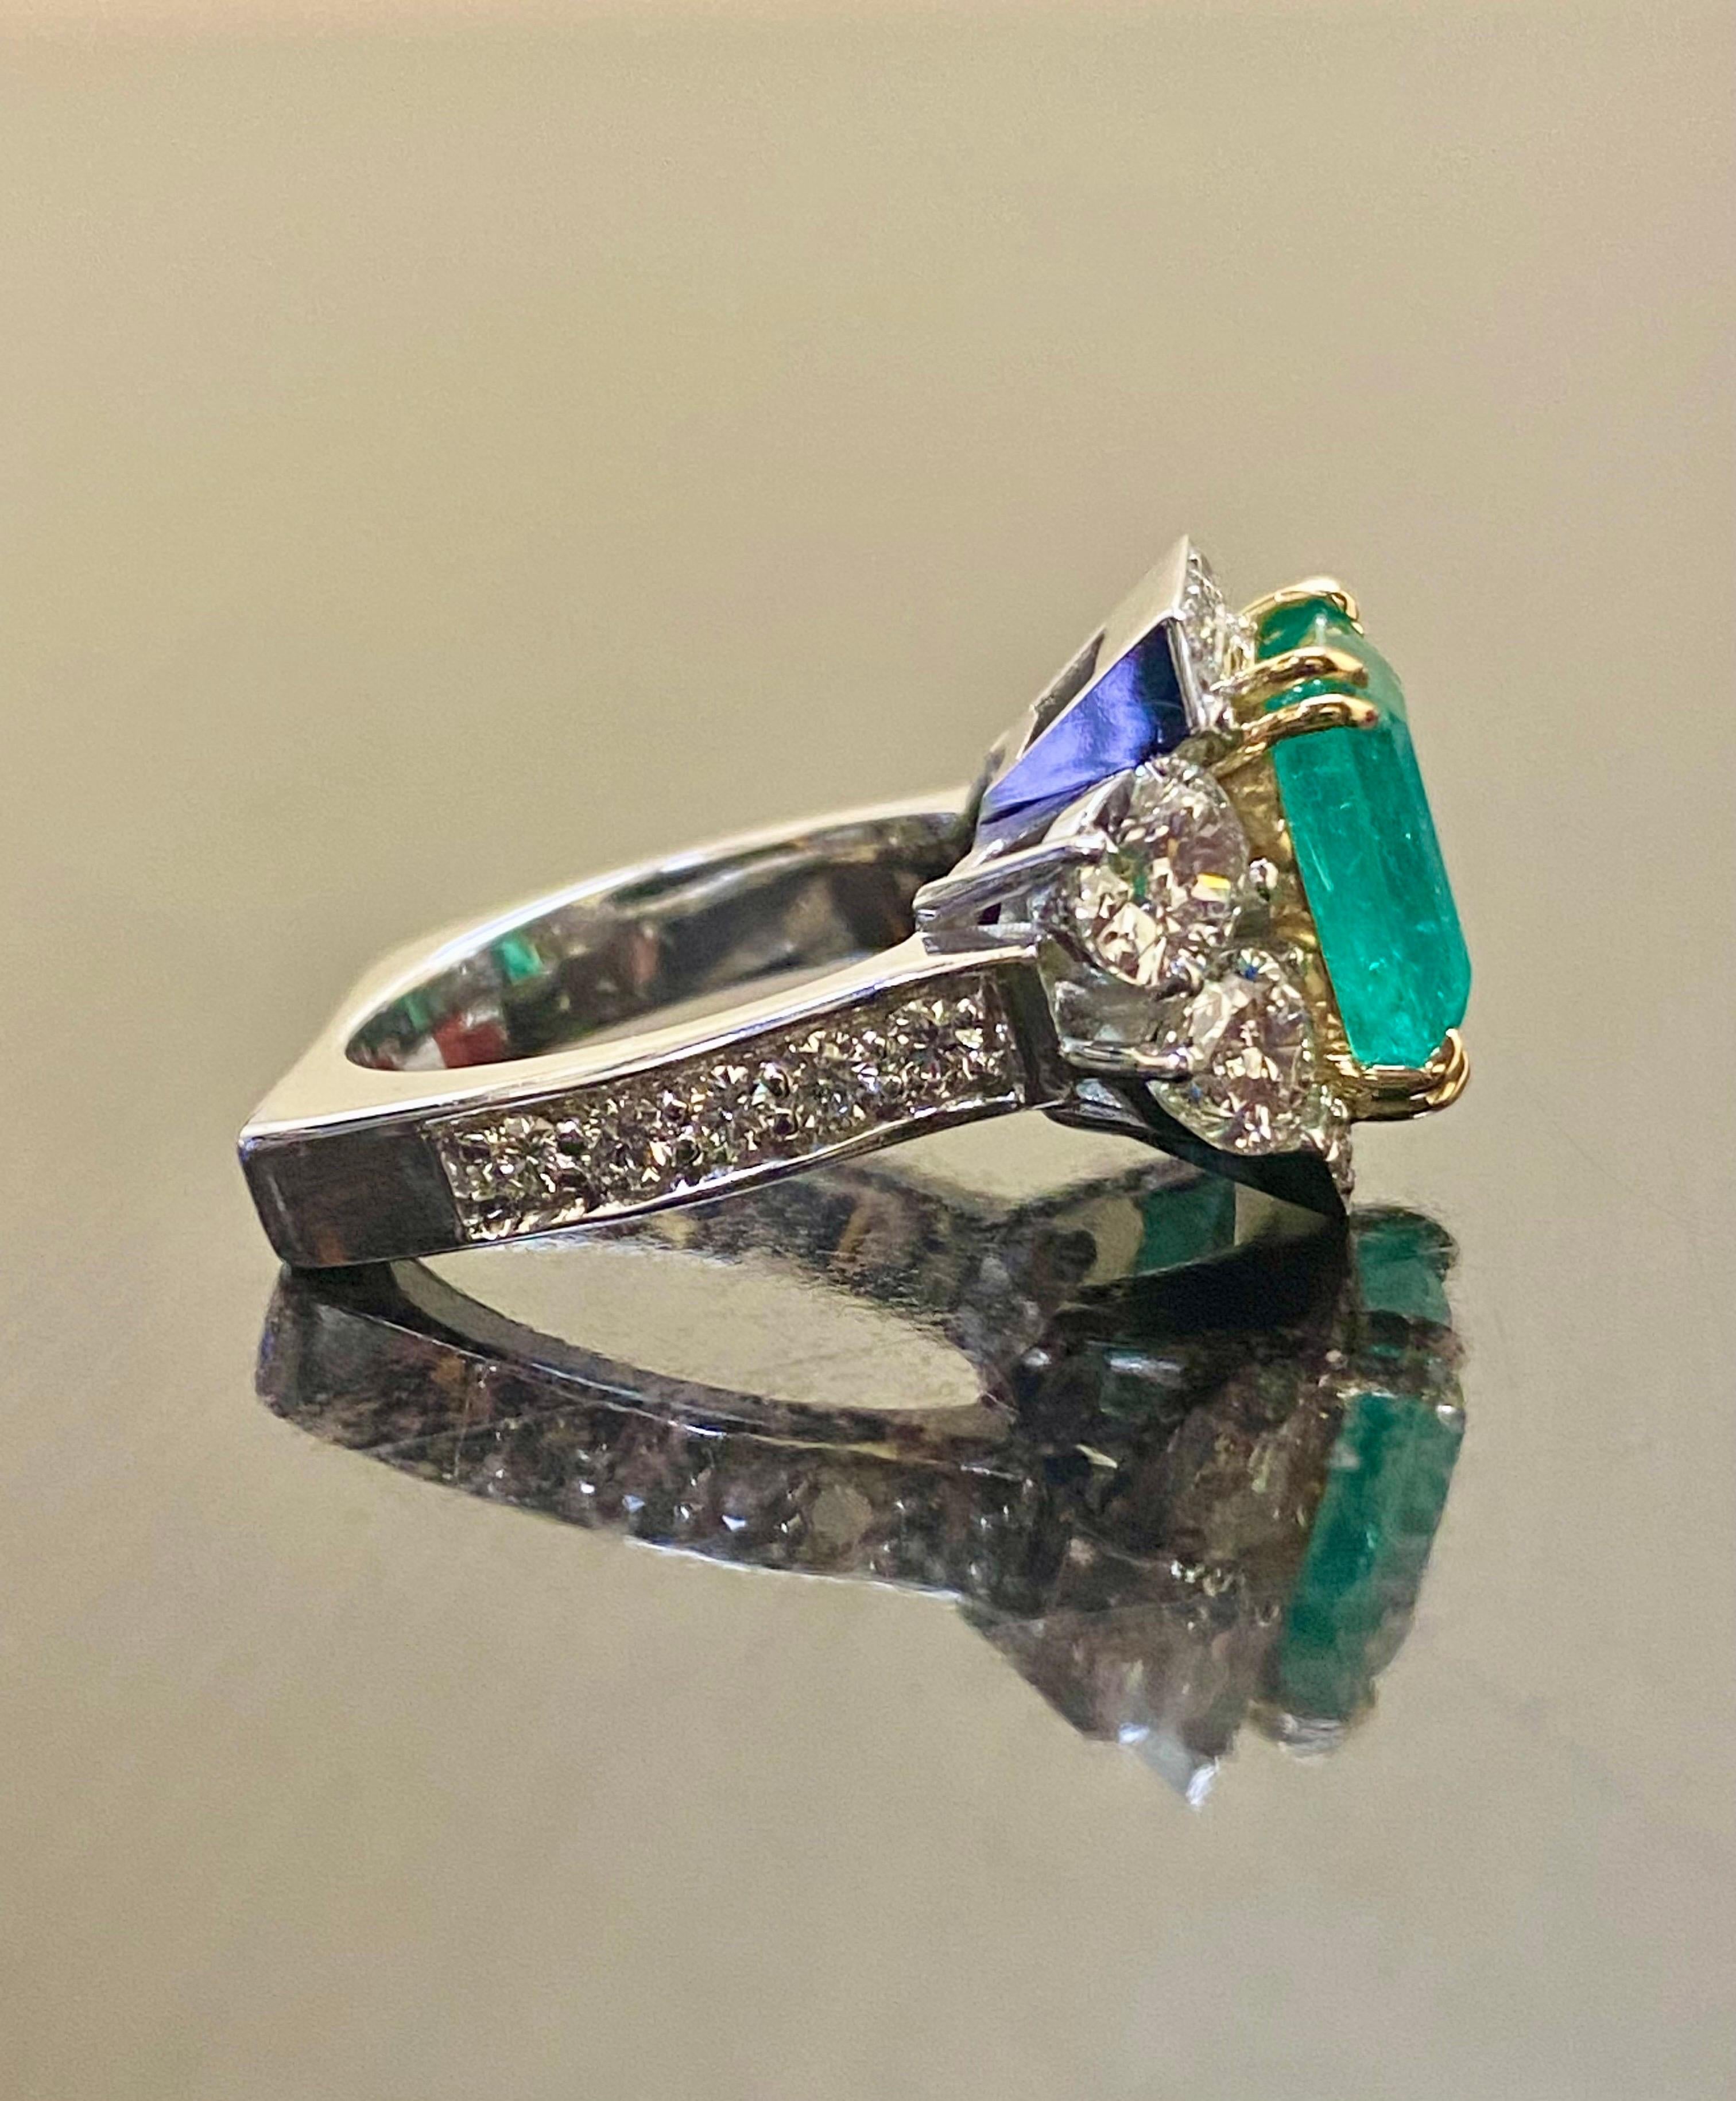 18K White Gold GIA Certified 4.87 Carat Colombian Emerald Diamond Ring For Sale 4